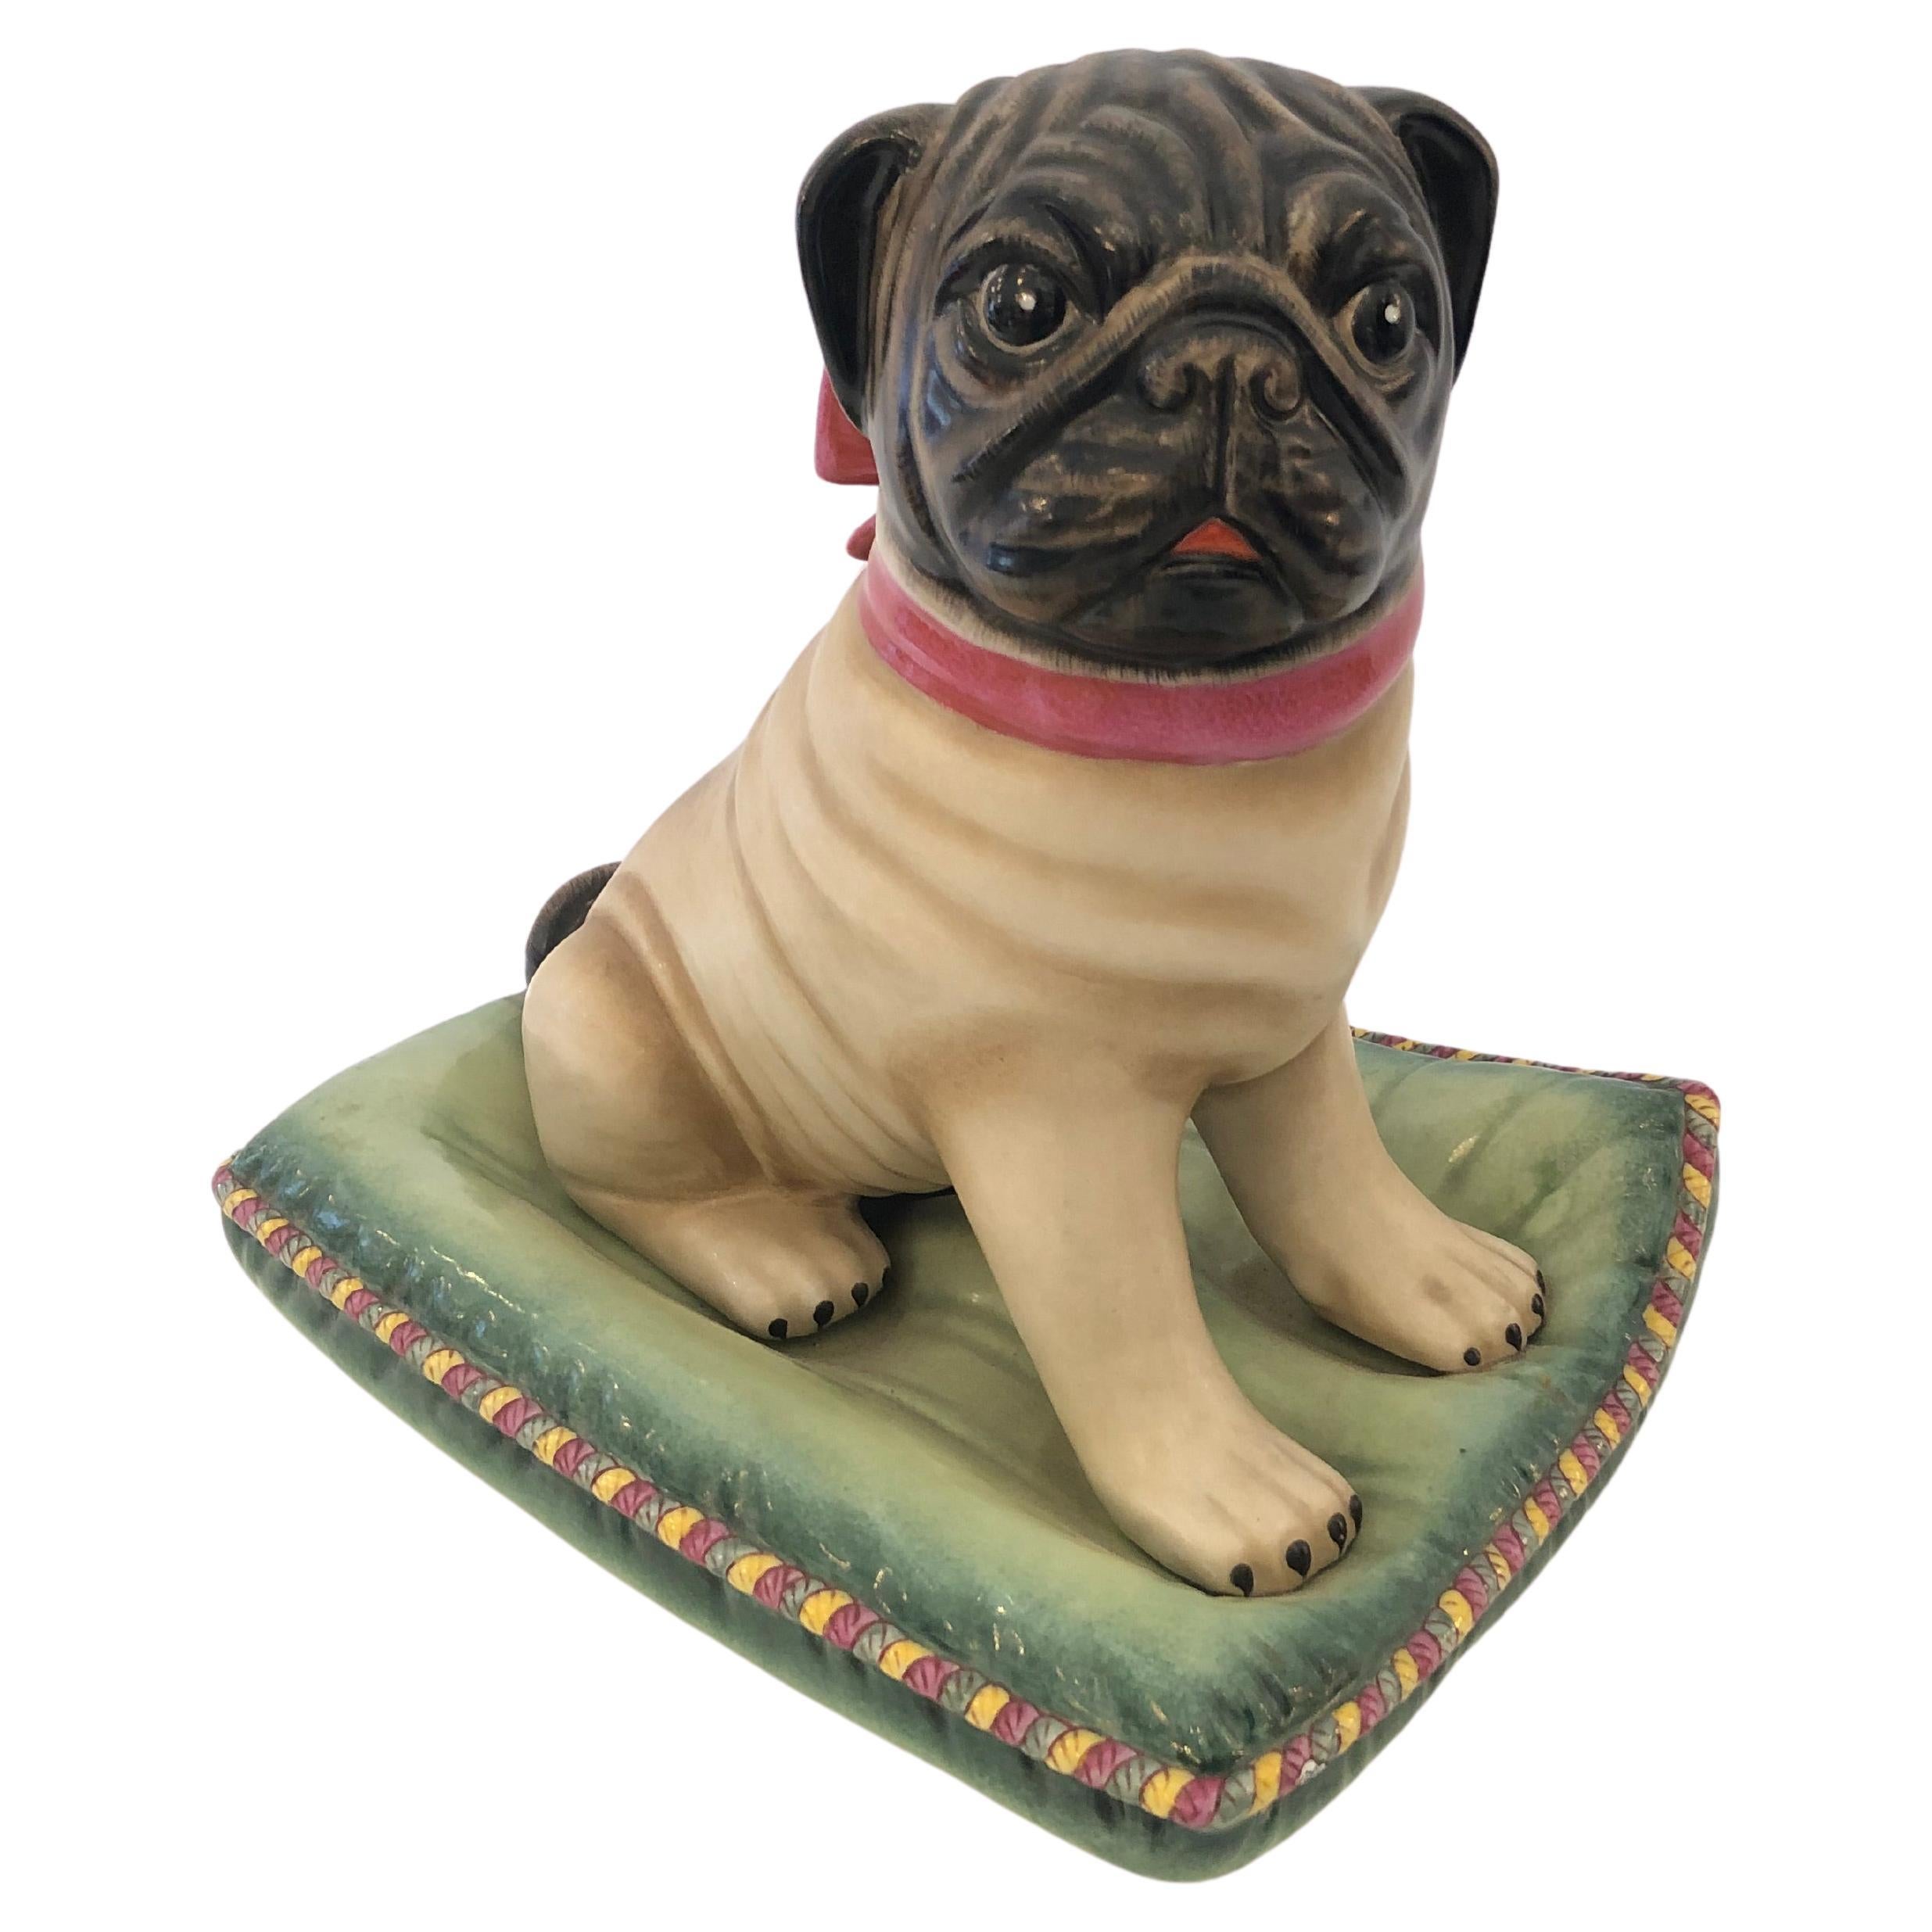 Irresistible Pug on a Pillow Vintage Tabletop Sculpture